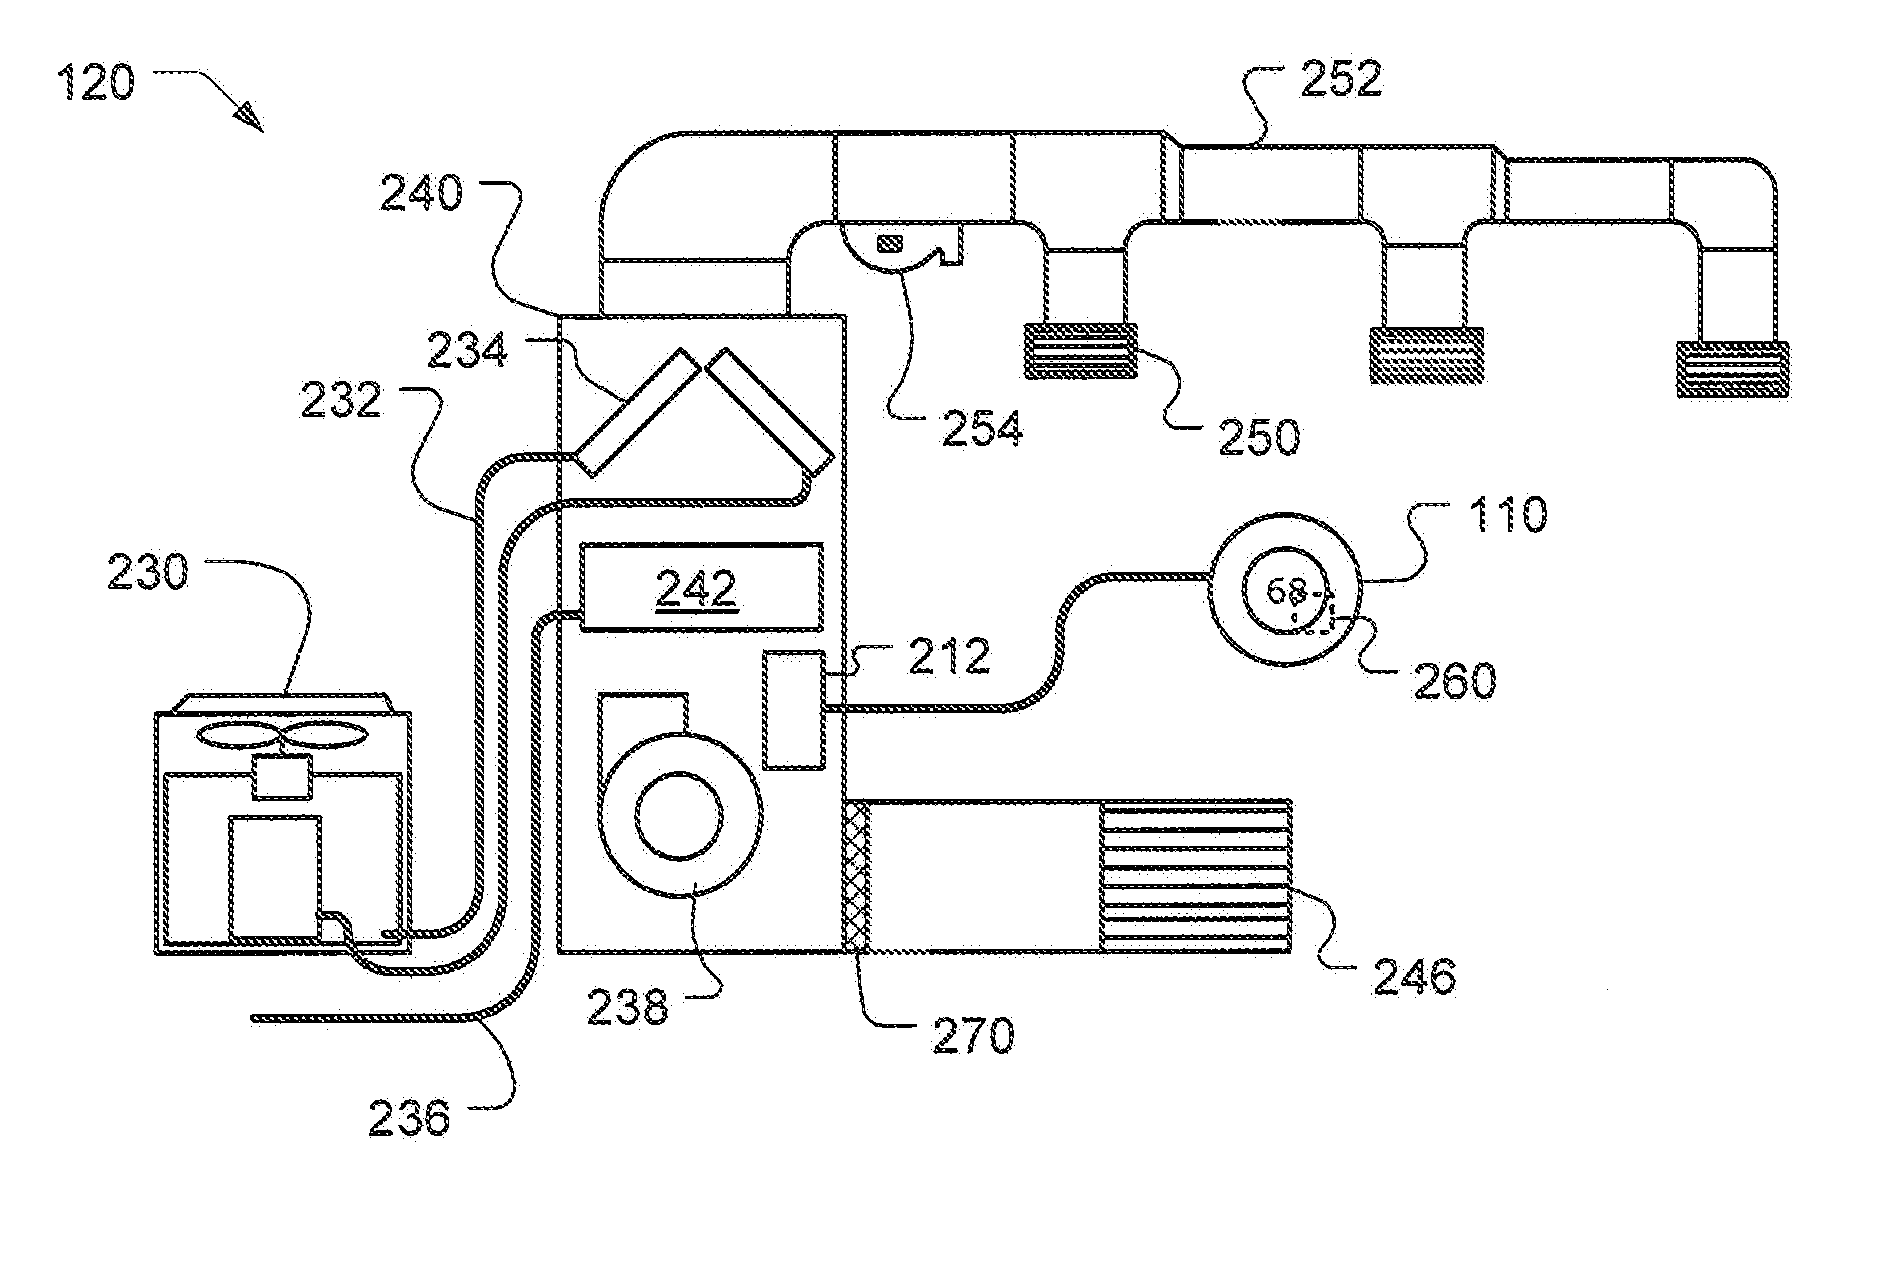 Thermostat graphical user interface